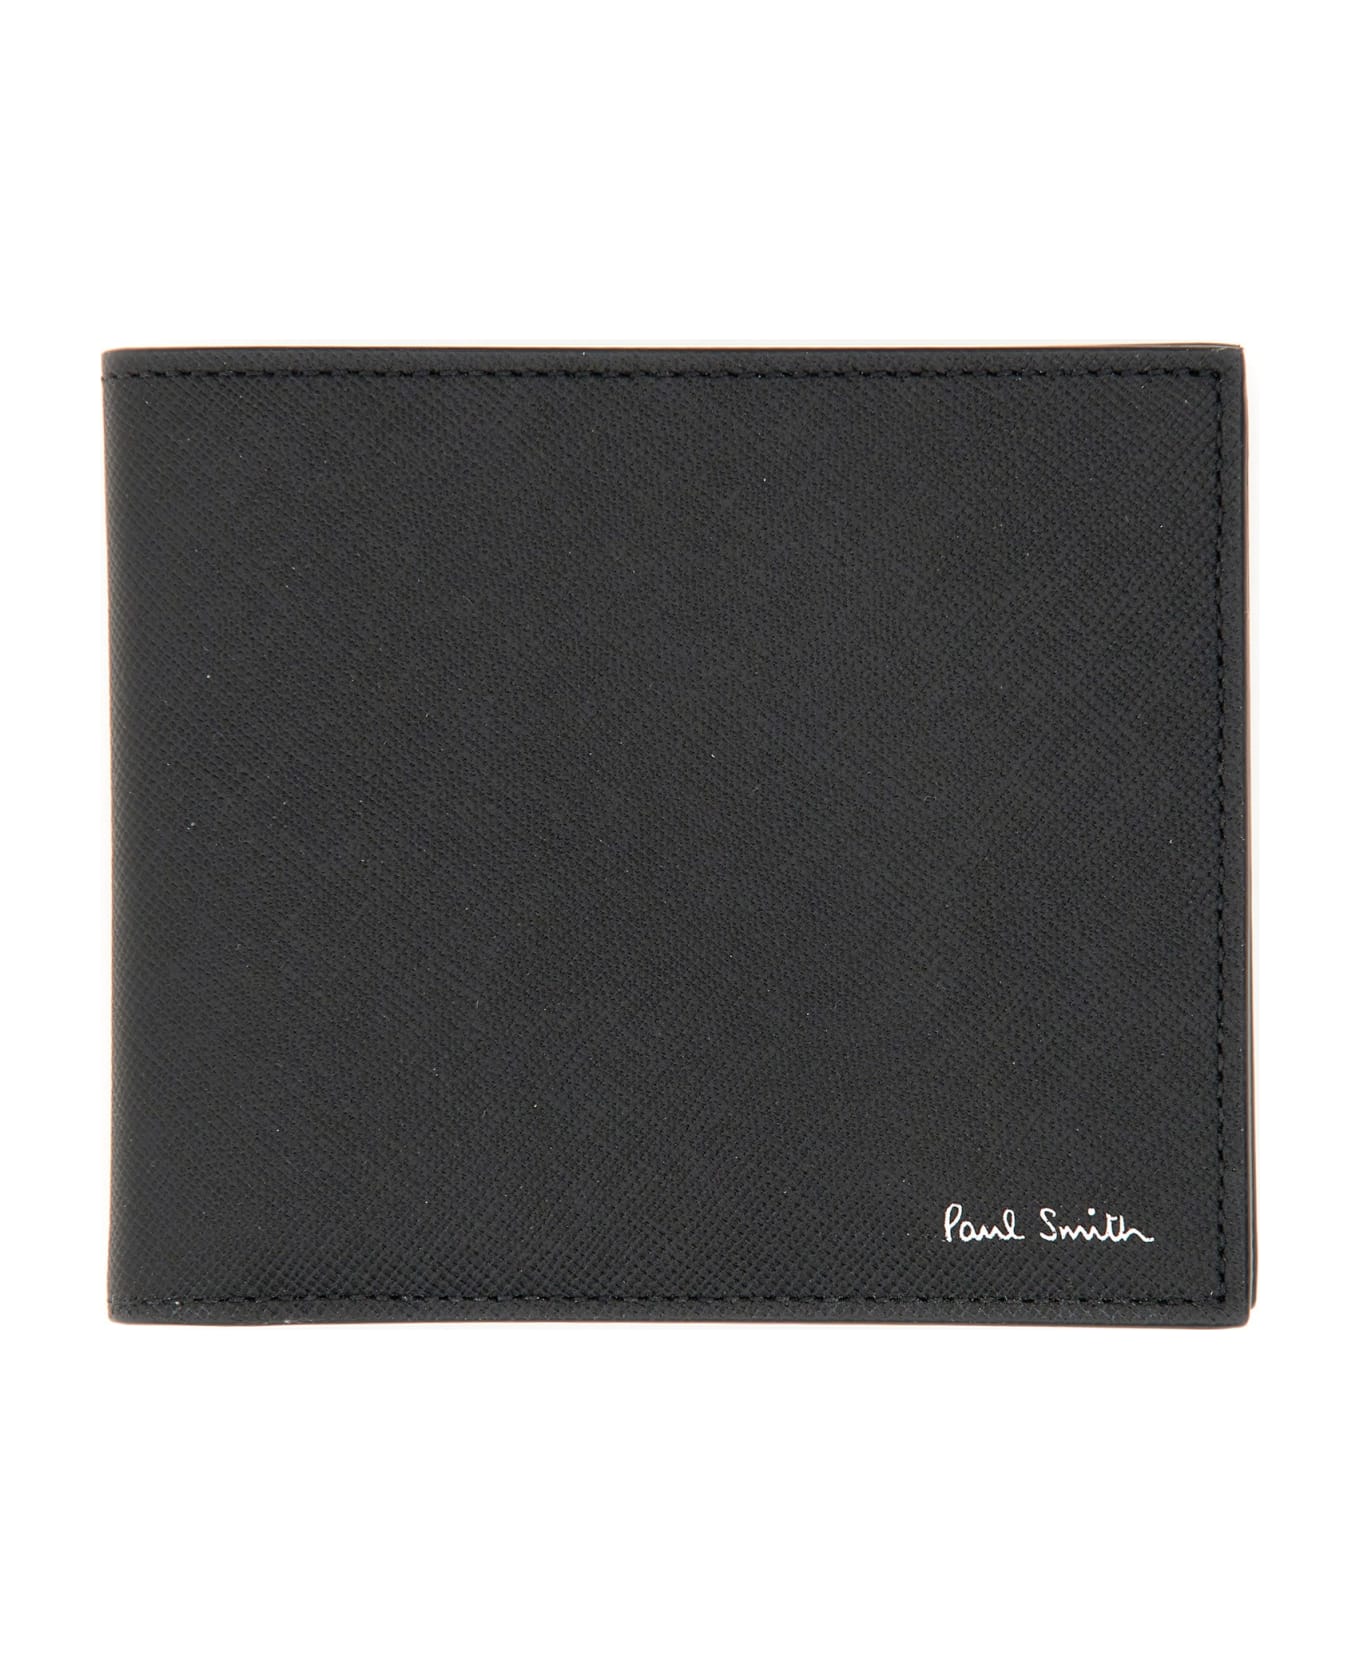 Paul Smith Leather Wallet - Black 財布